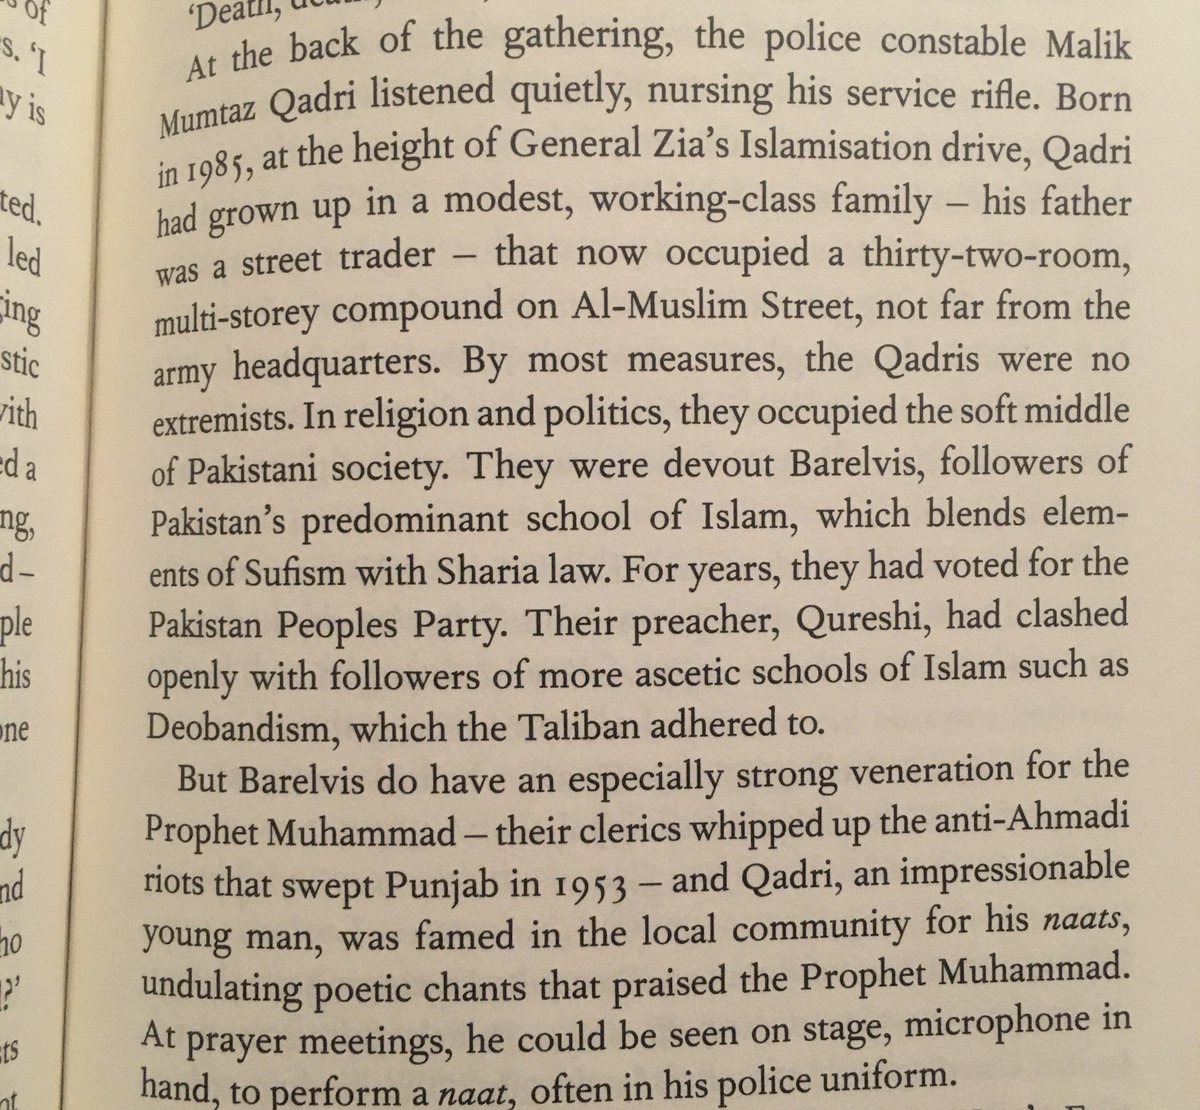 1. Declan Walsh’s “The Nine Lives of Pakistan” distills the complexity of Pakistan in page turning prose. It isn’t intended as an academic work so at the risk of nit-picking I think this page describing Deobandis & Barelvis warrants additional context.